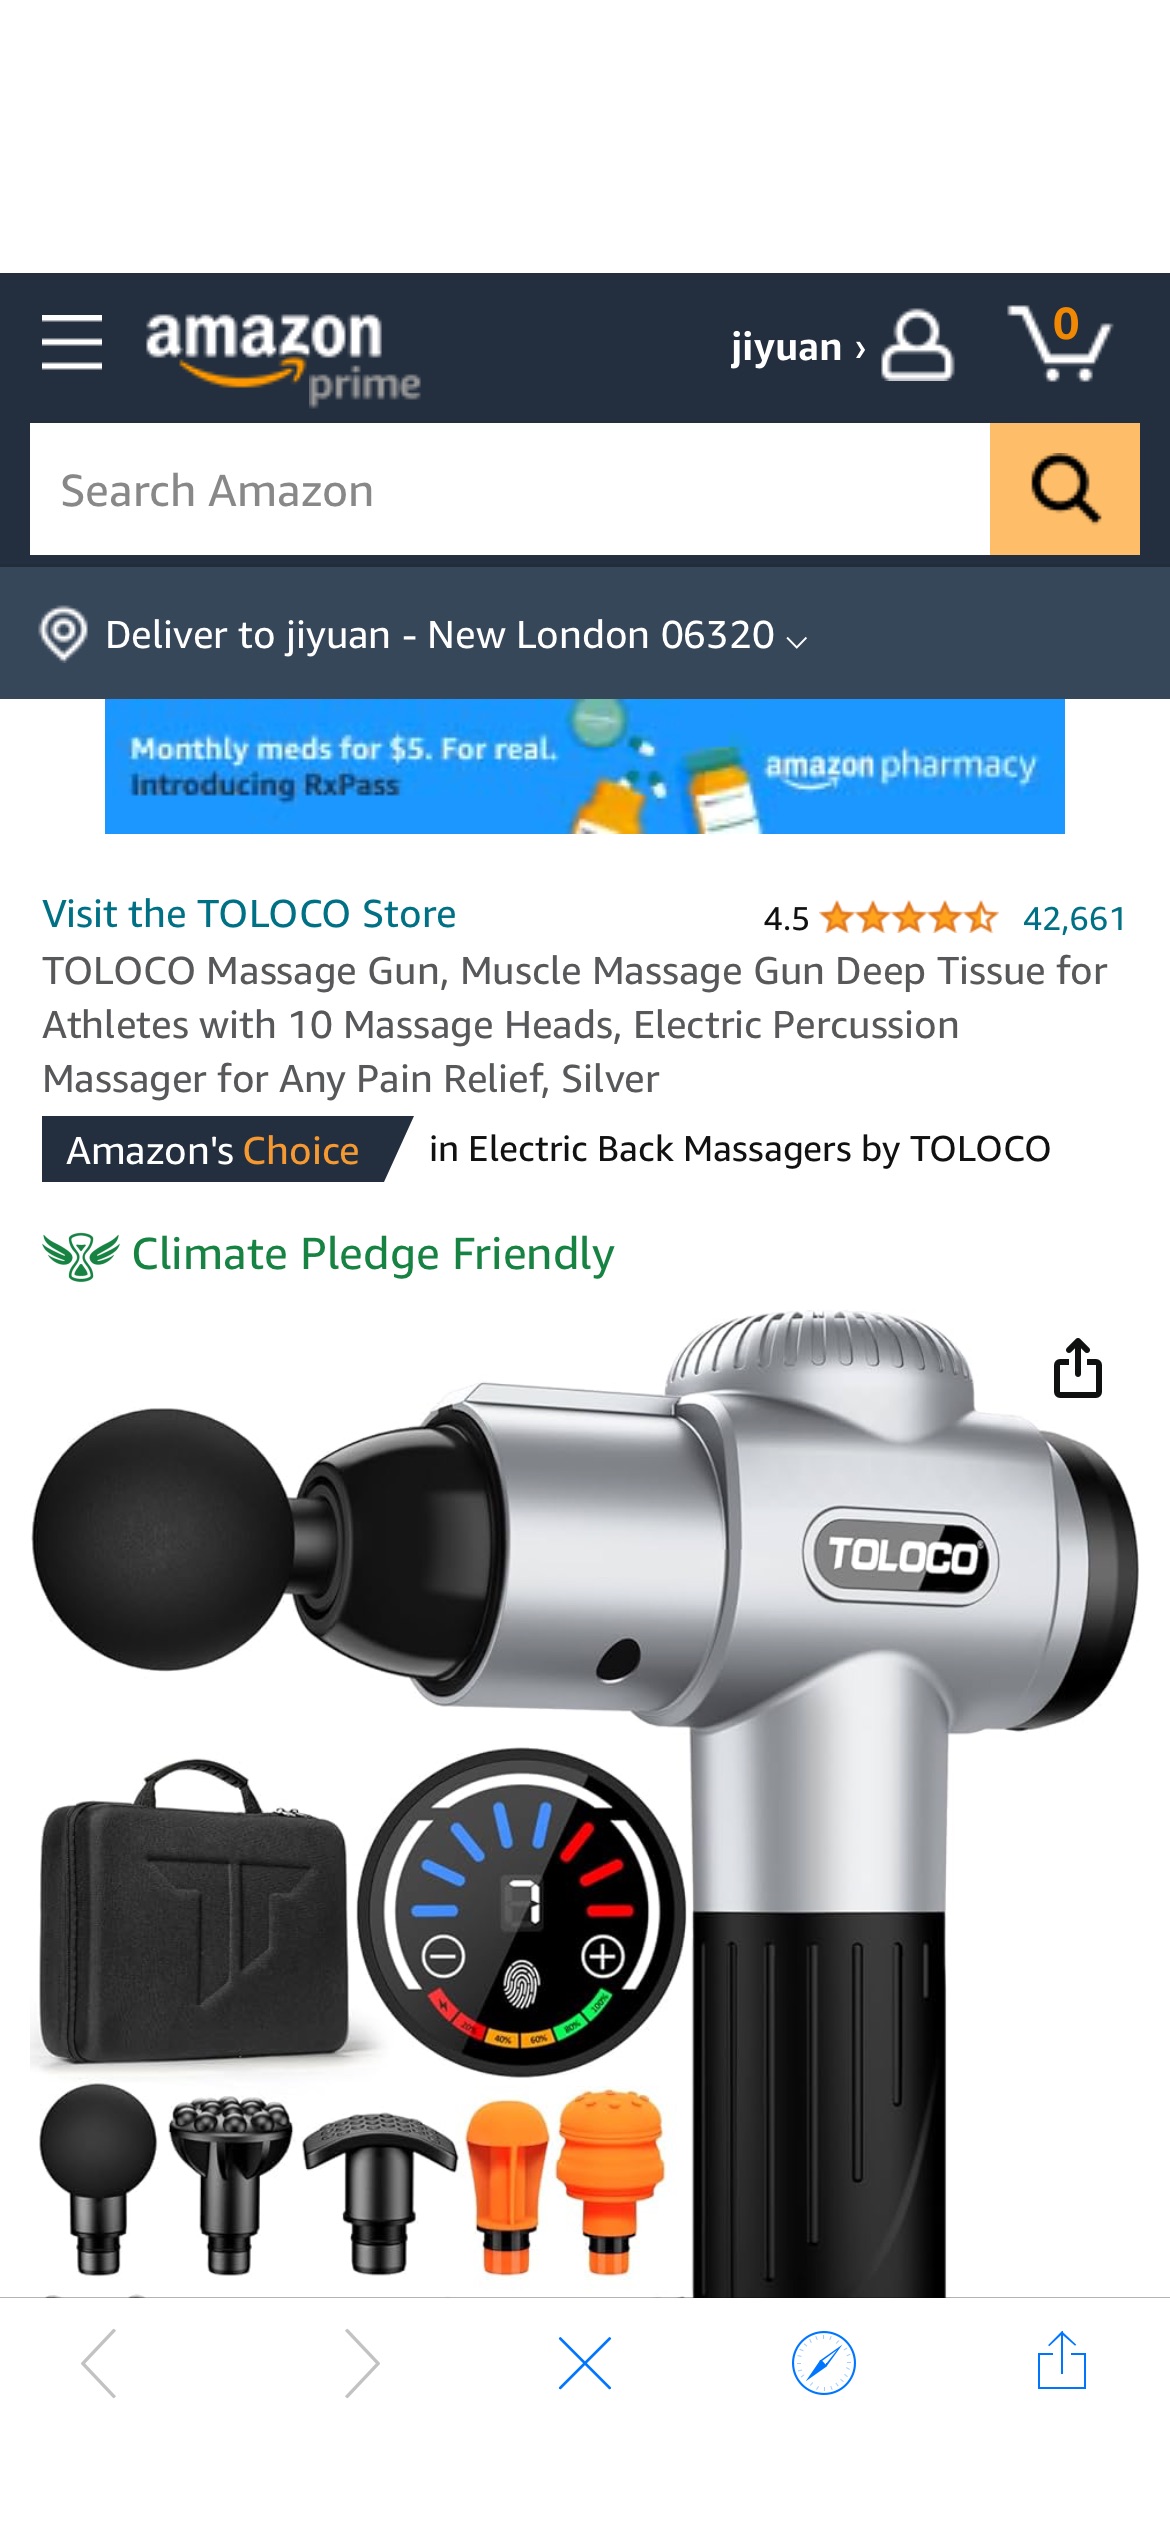 Amazon.com: TOLOCO Massage Gun, Muscle Massage Gun Deep Tissue for Athletes with 10 Massage Heads, Electric Percussion Massager for Any Pain Relief, Silver : Health & Household